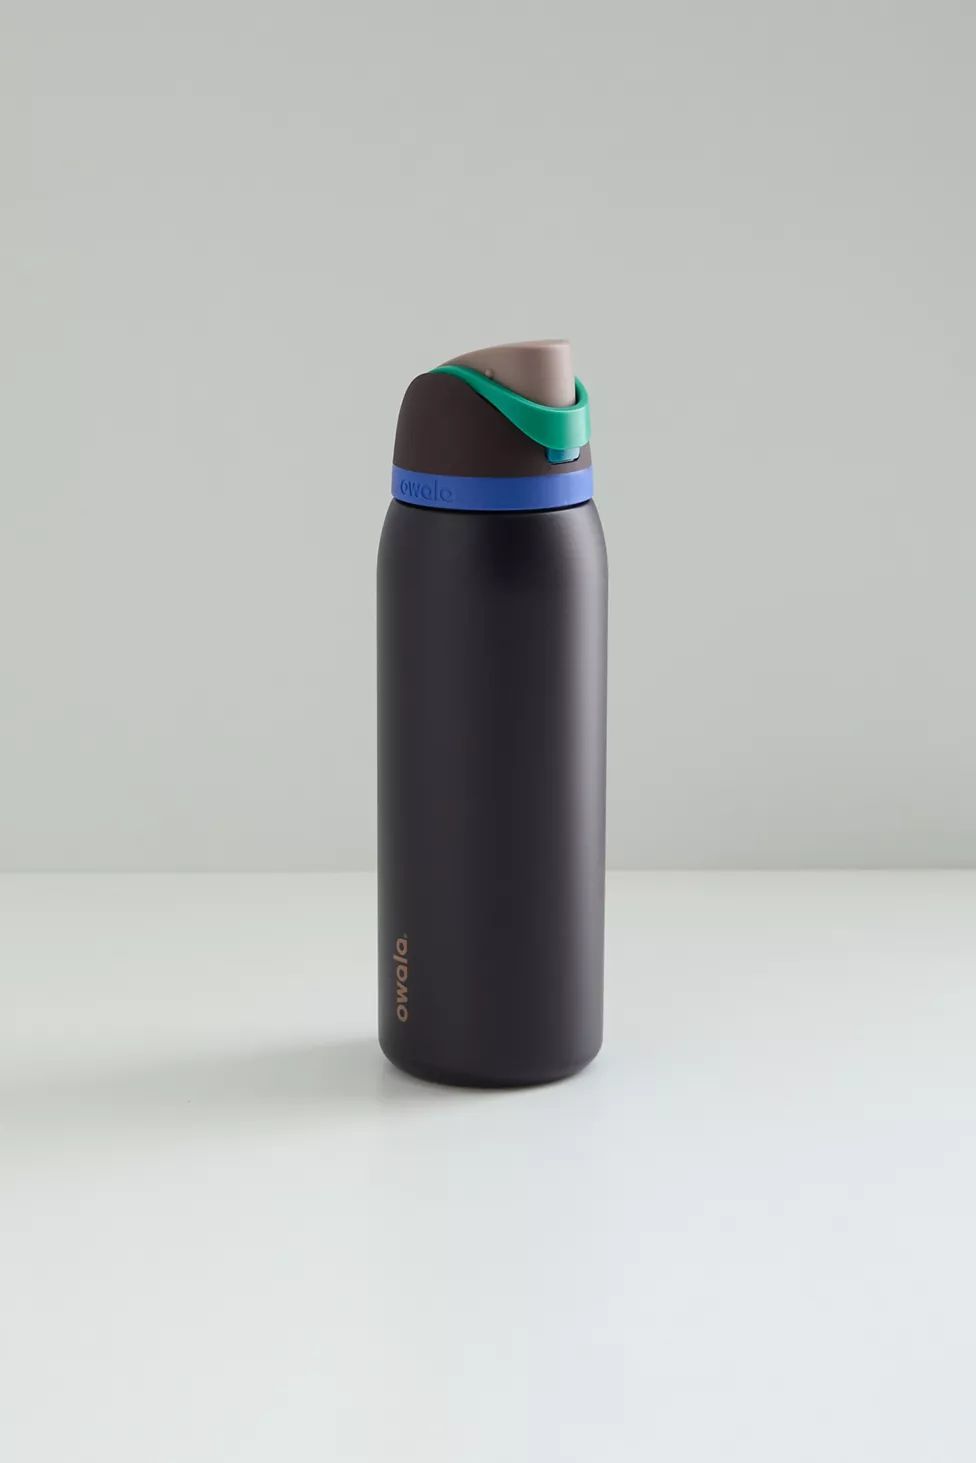 Owala FreeSip 40 oz Water Bottle | Urban Outfitters (US and RoW)